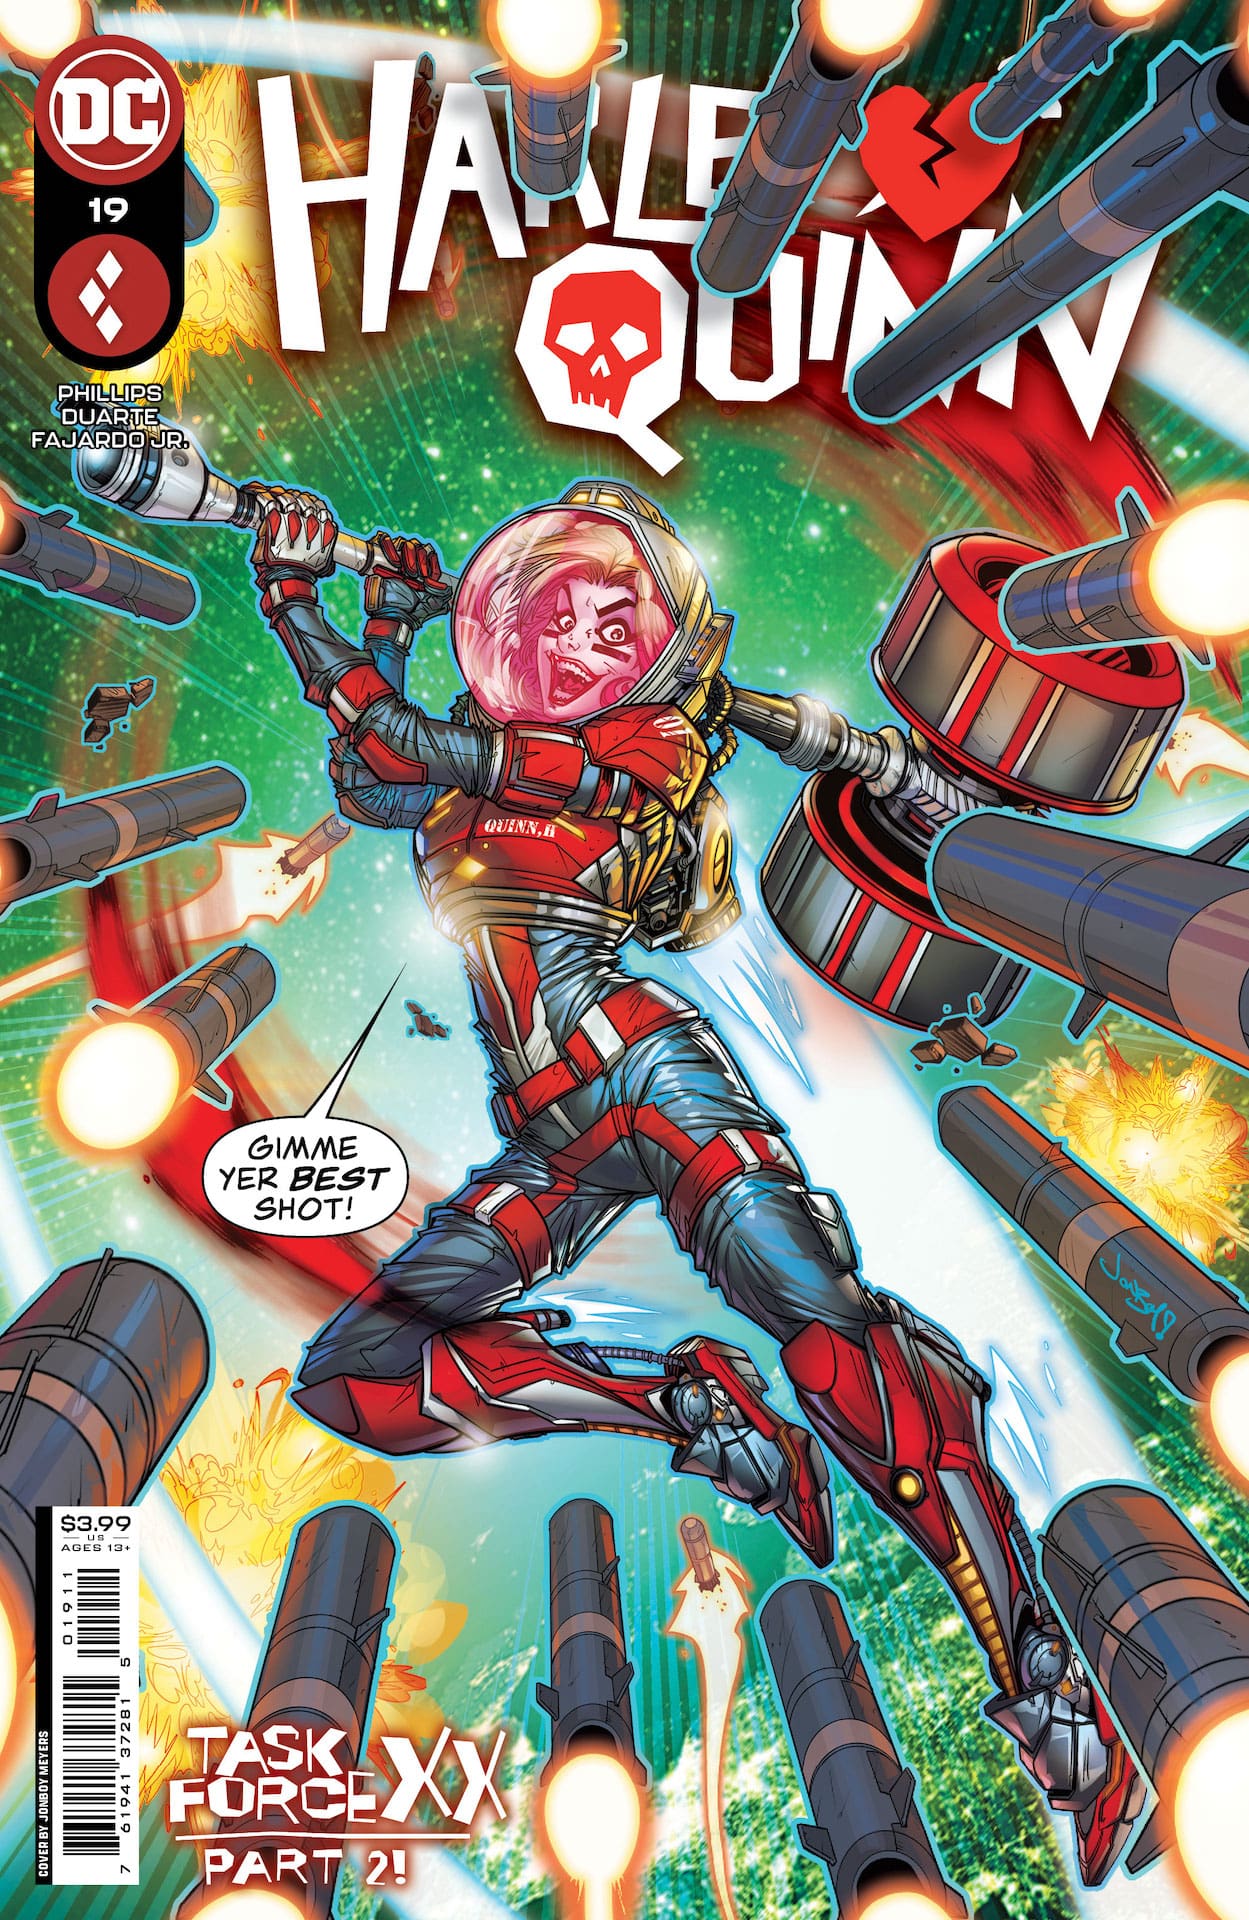 DC Preview: Harley Quinn #19